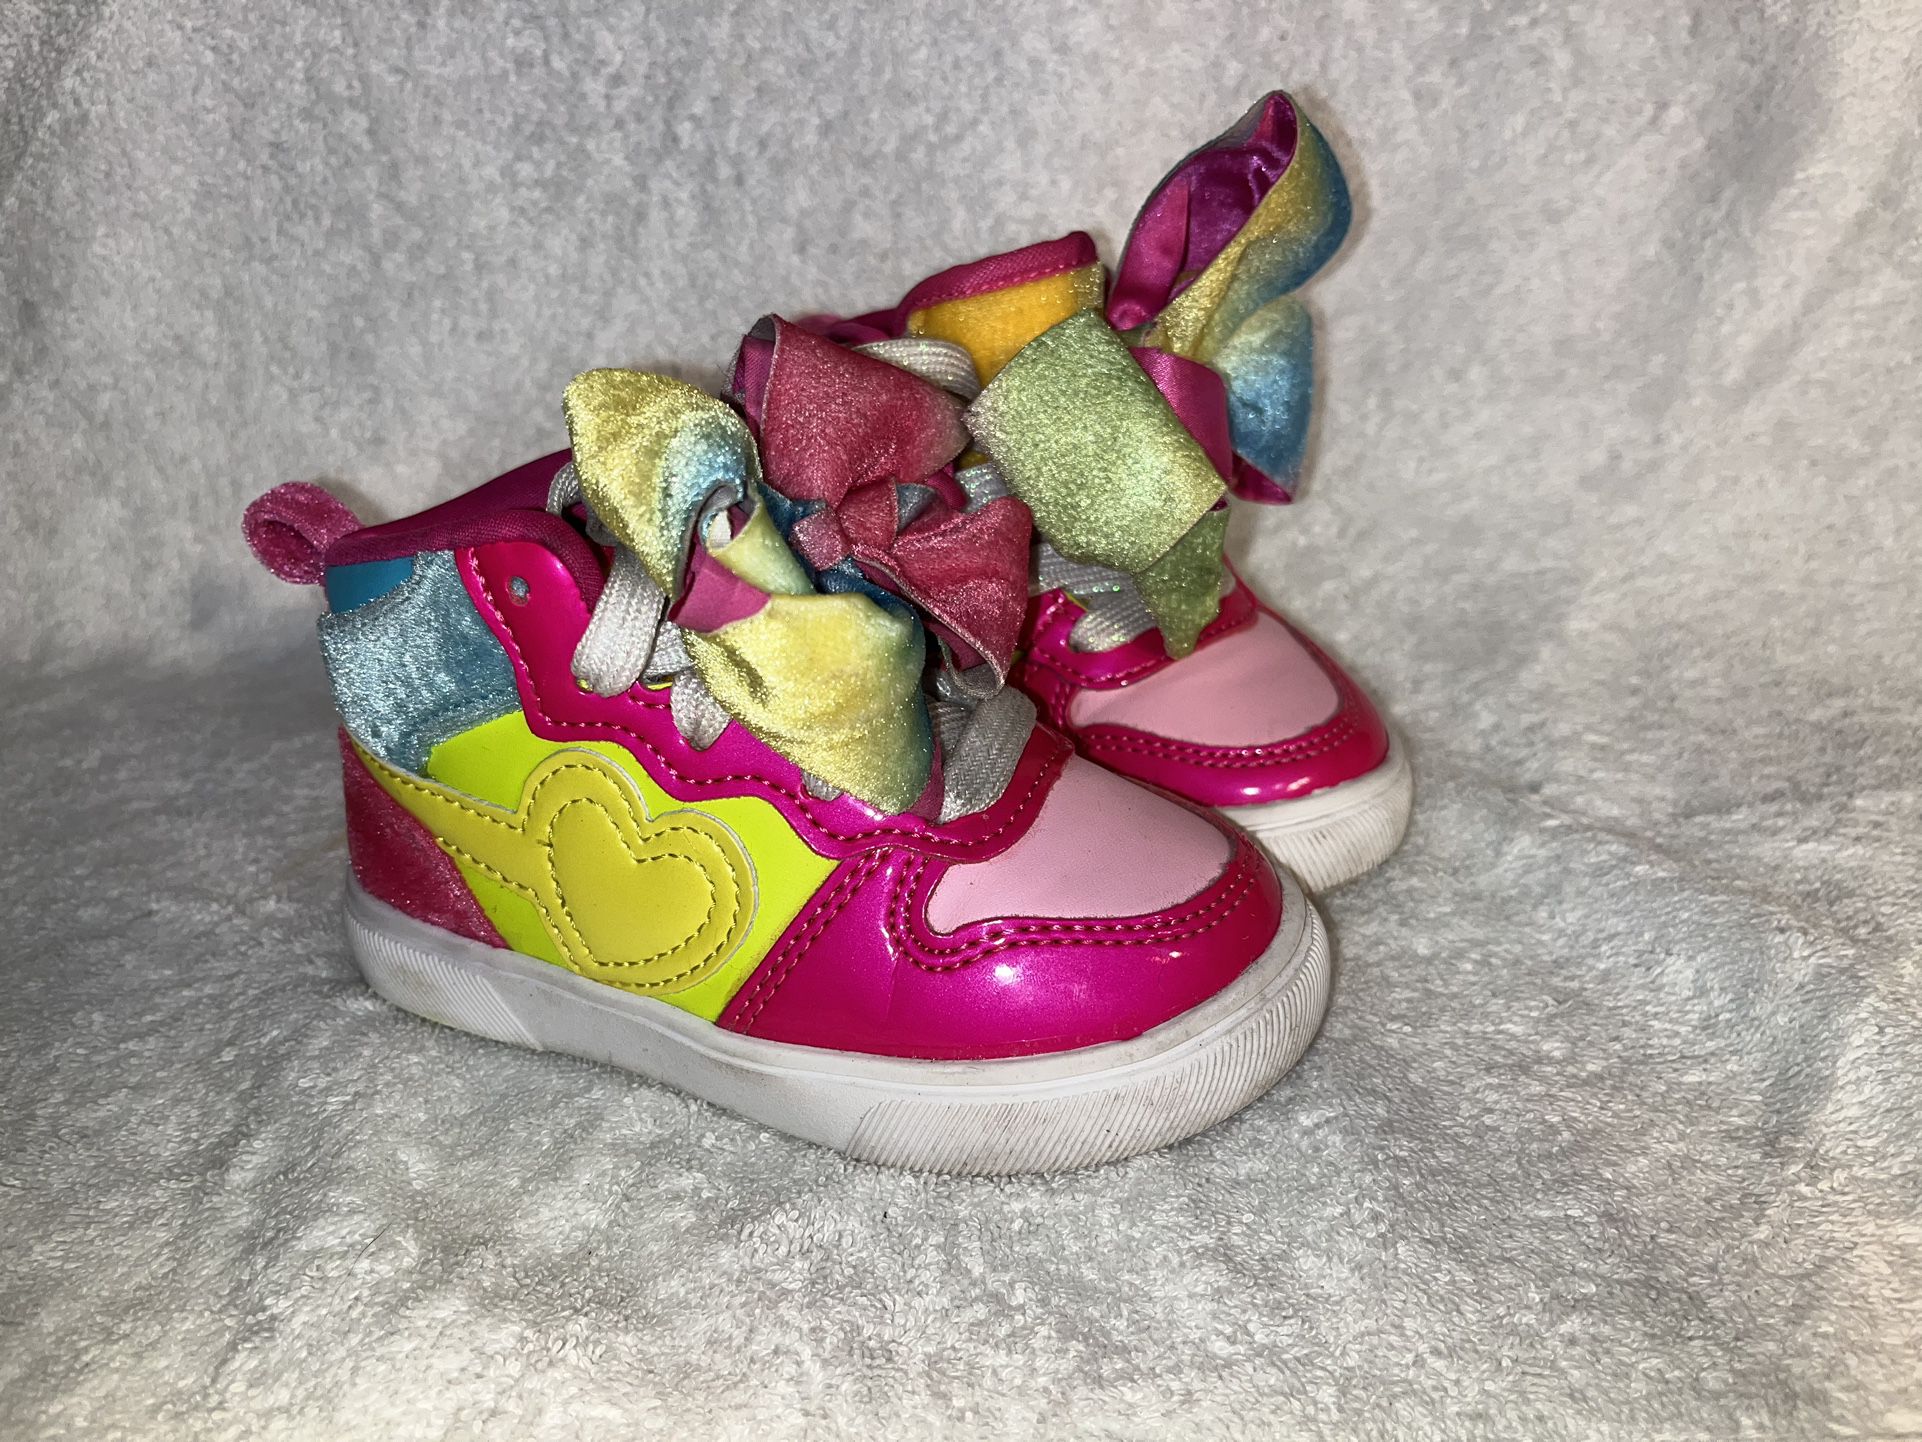 PENDING JoJo Siwa Girls High Top Shoes, size 7T Heart Rainbow Sneaker With Bows